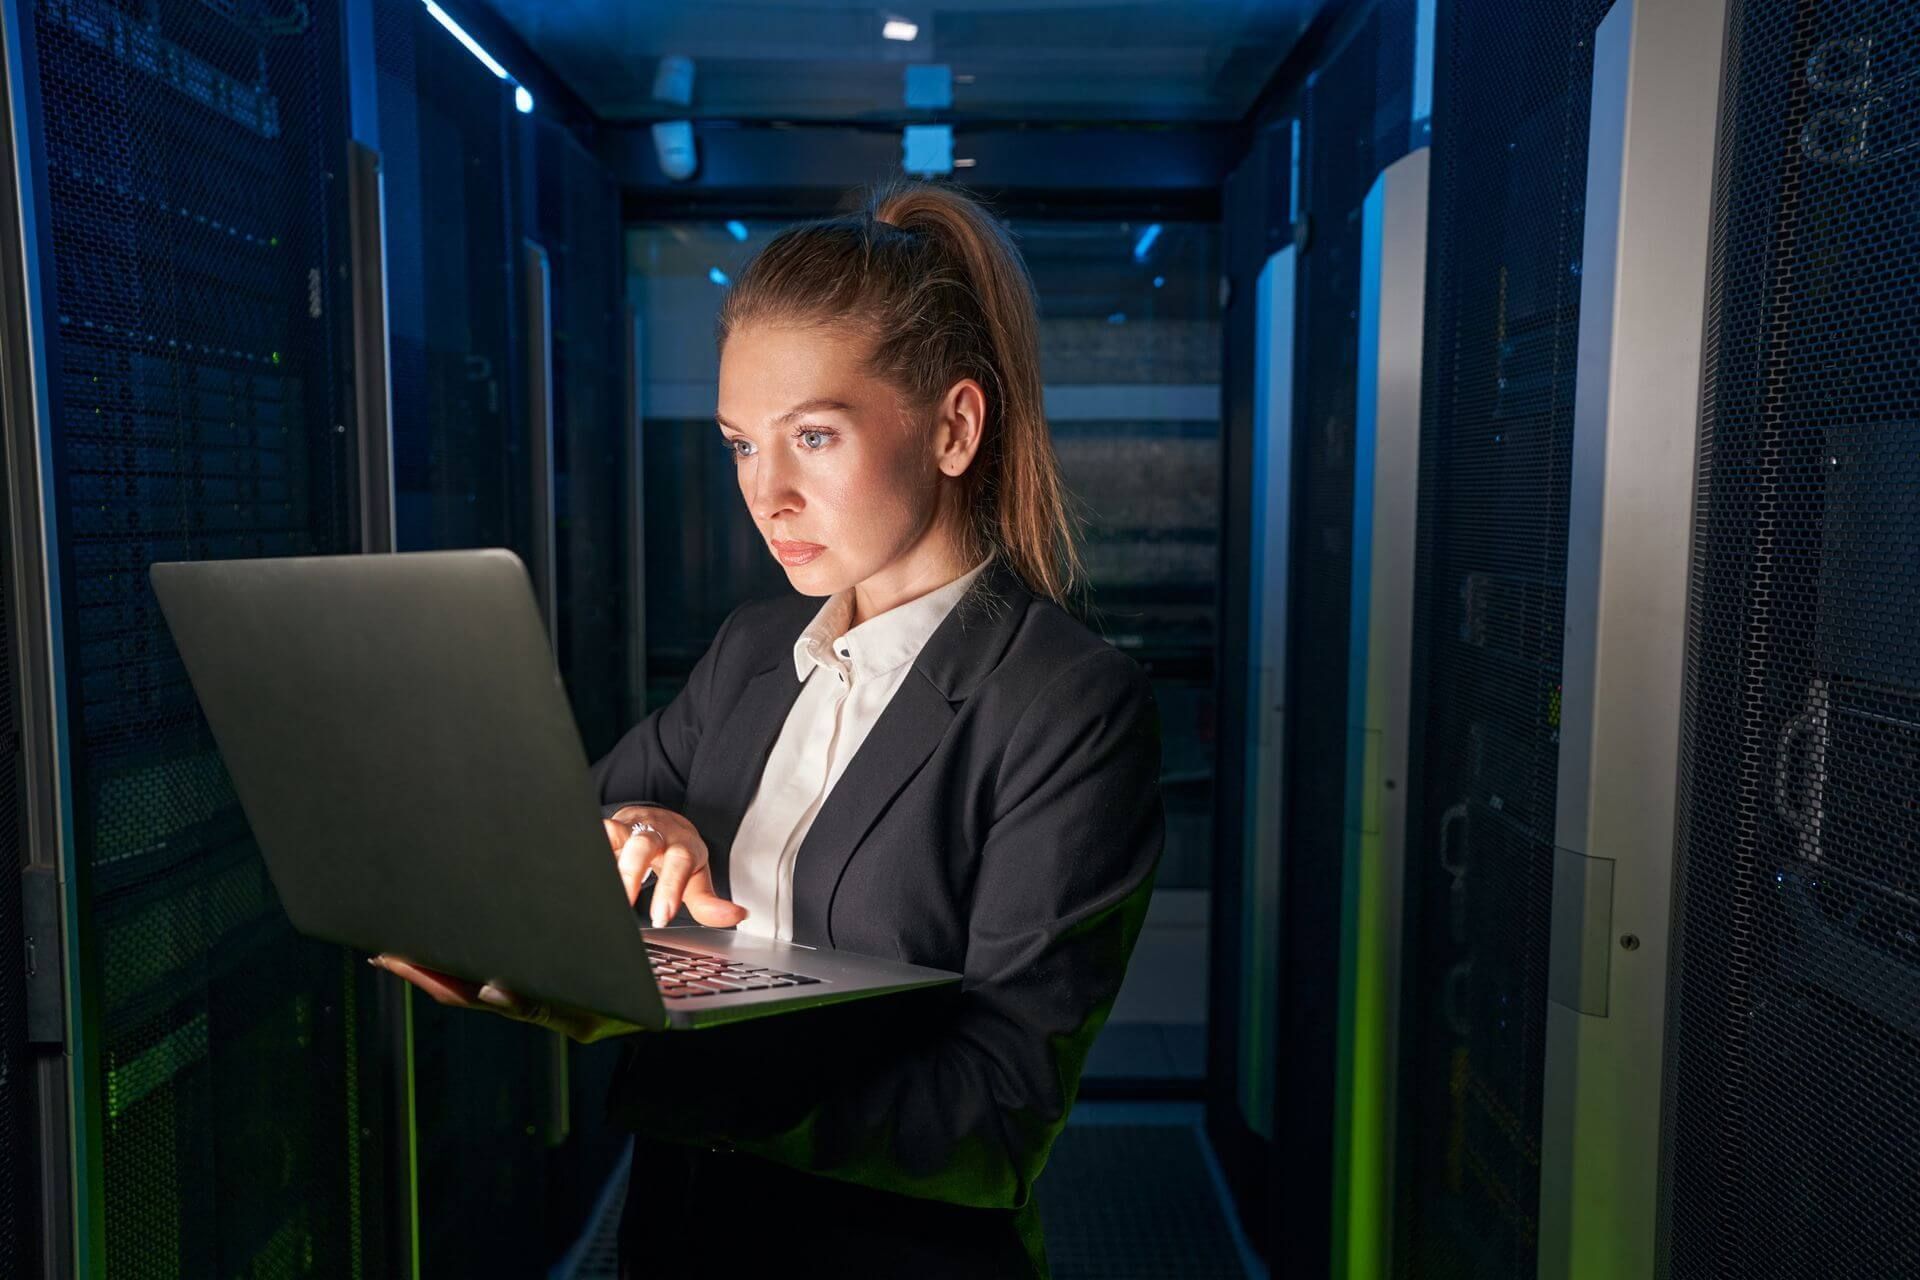 a woman is working on a laptop in a server room